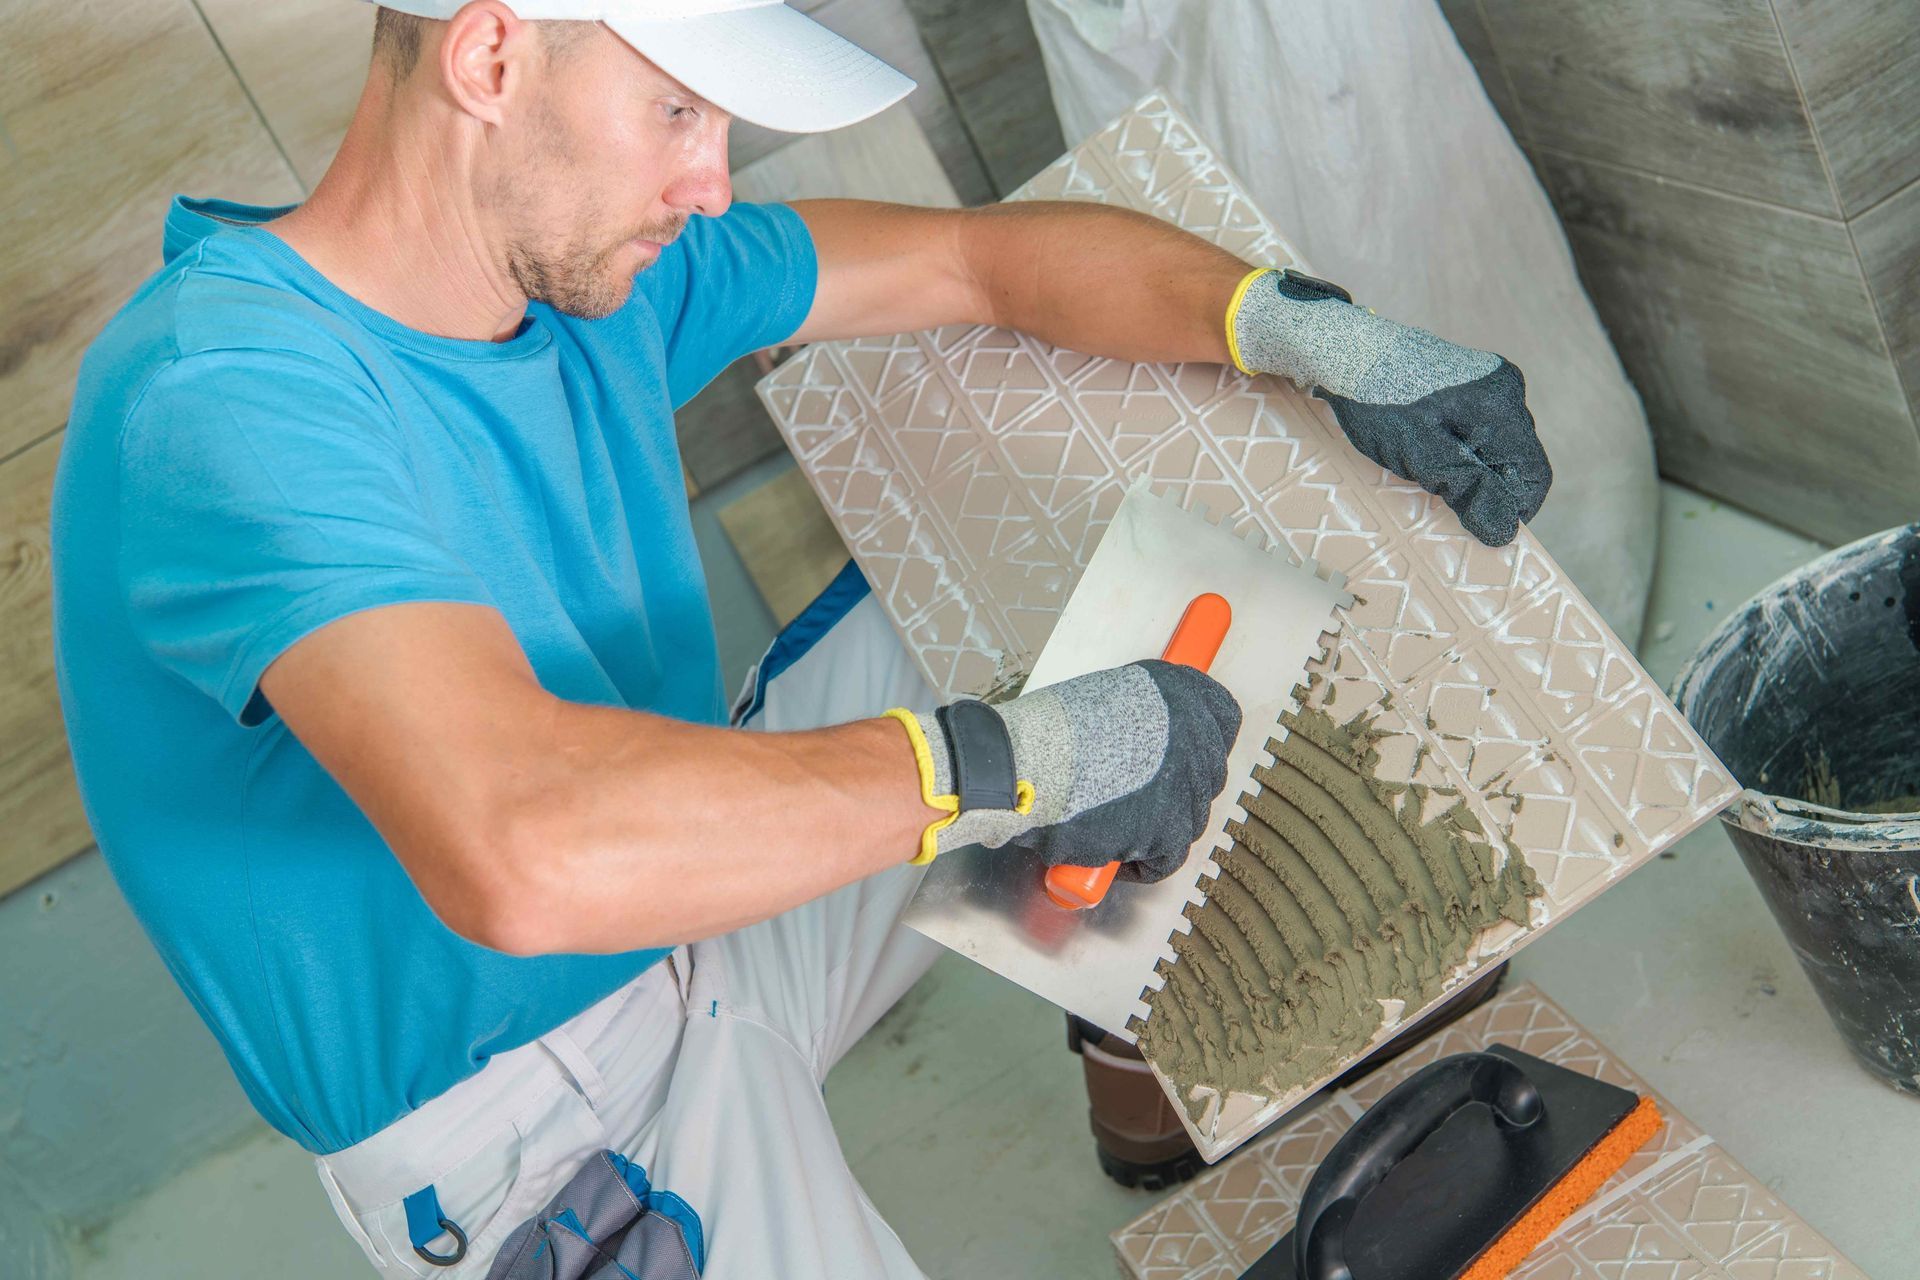 a man wearing gloves is using a trowel to apply concrete to a tile